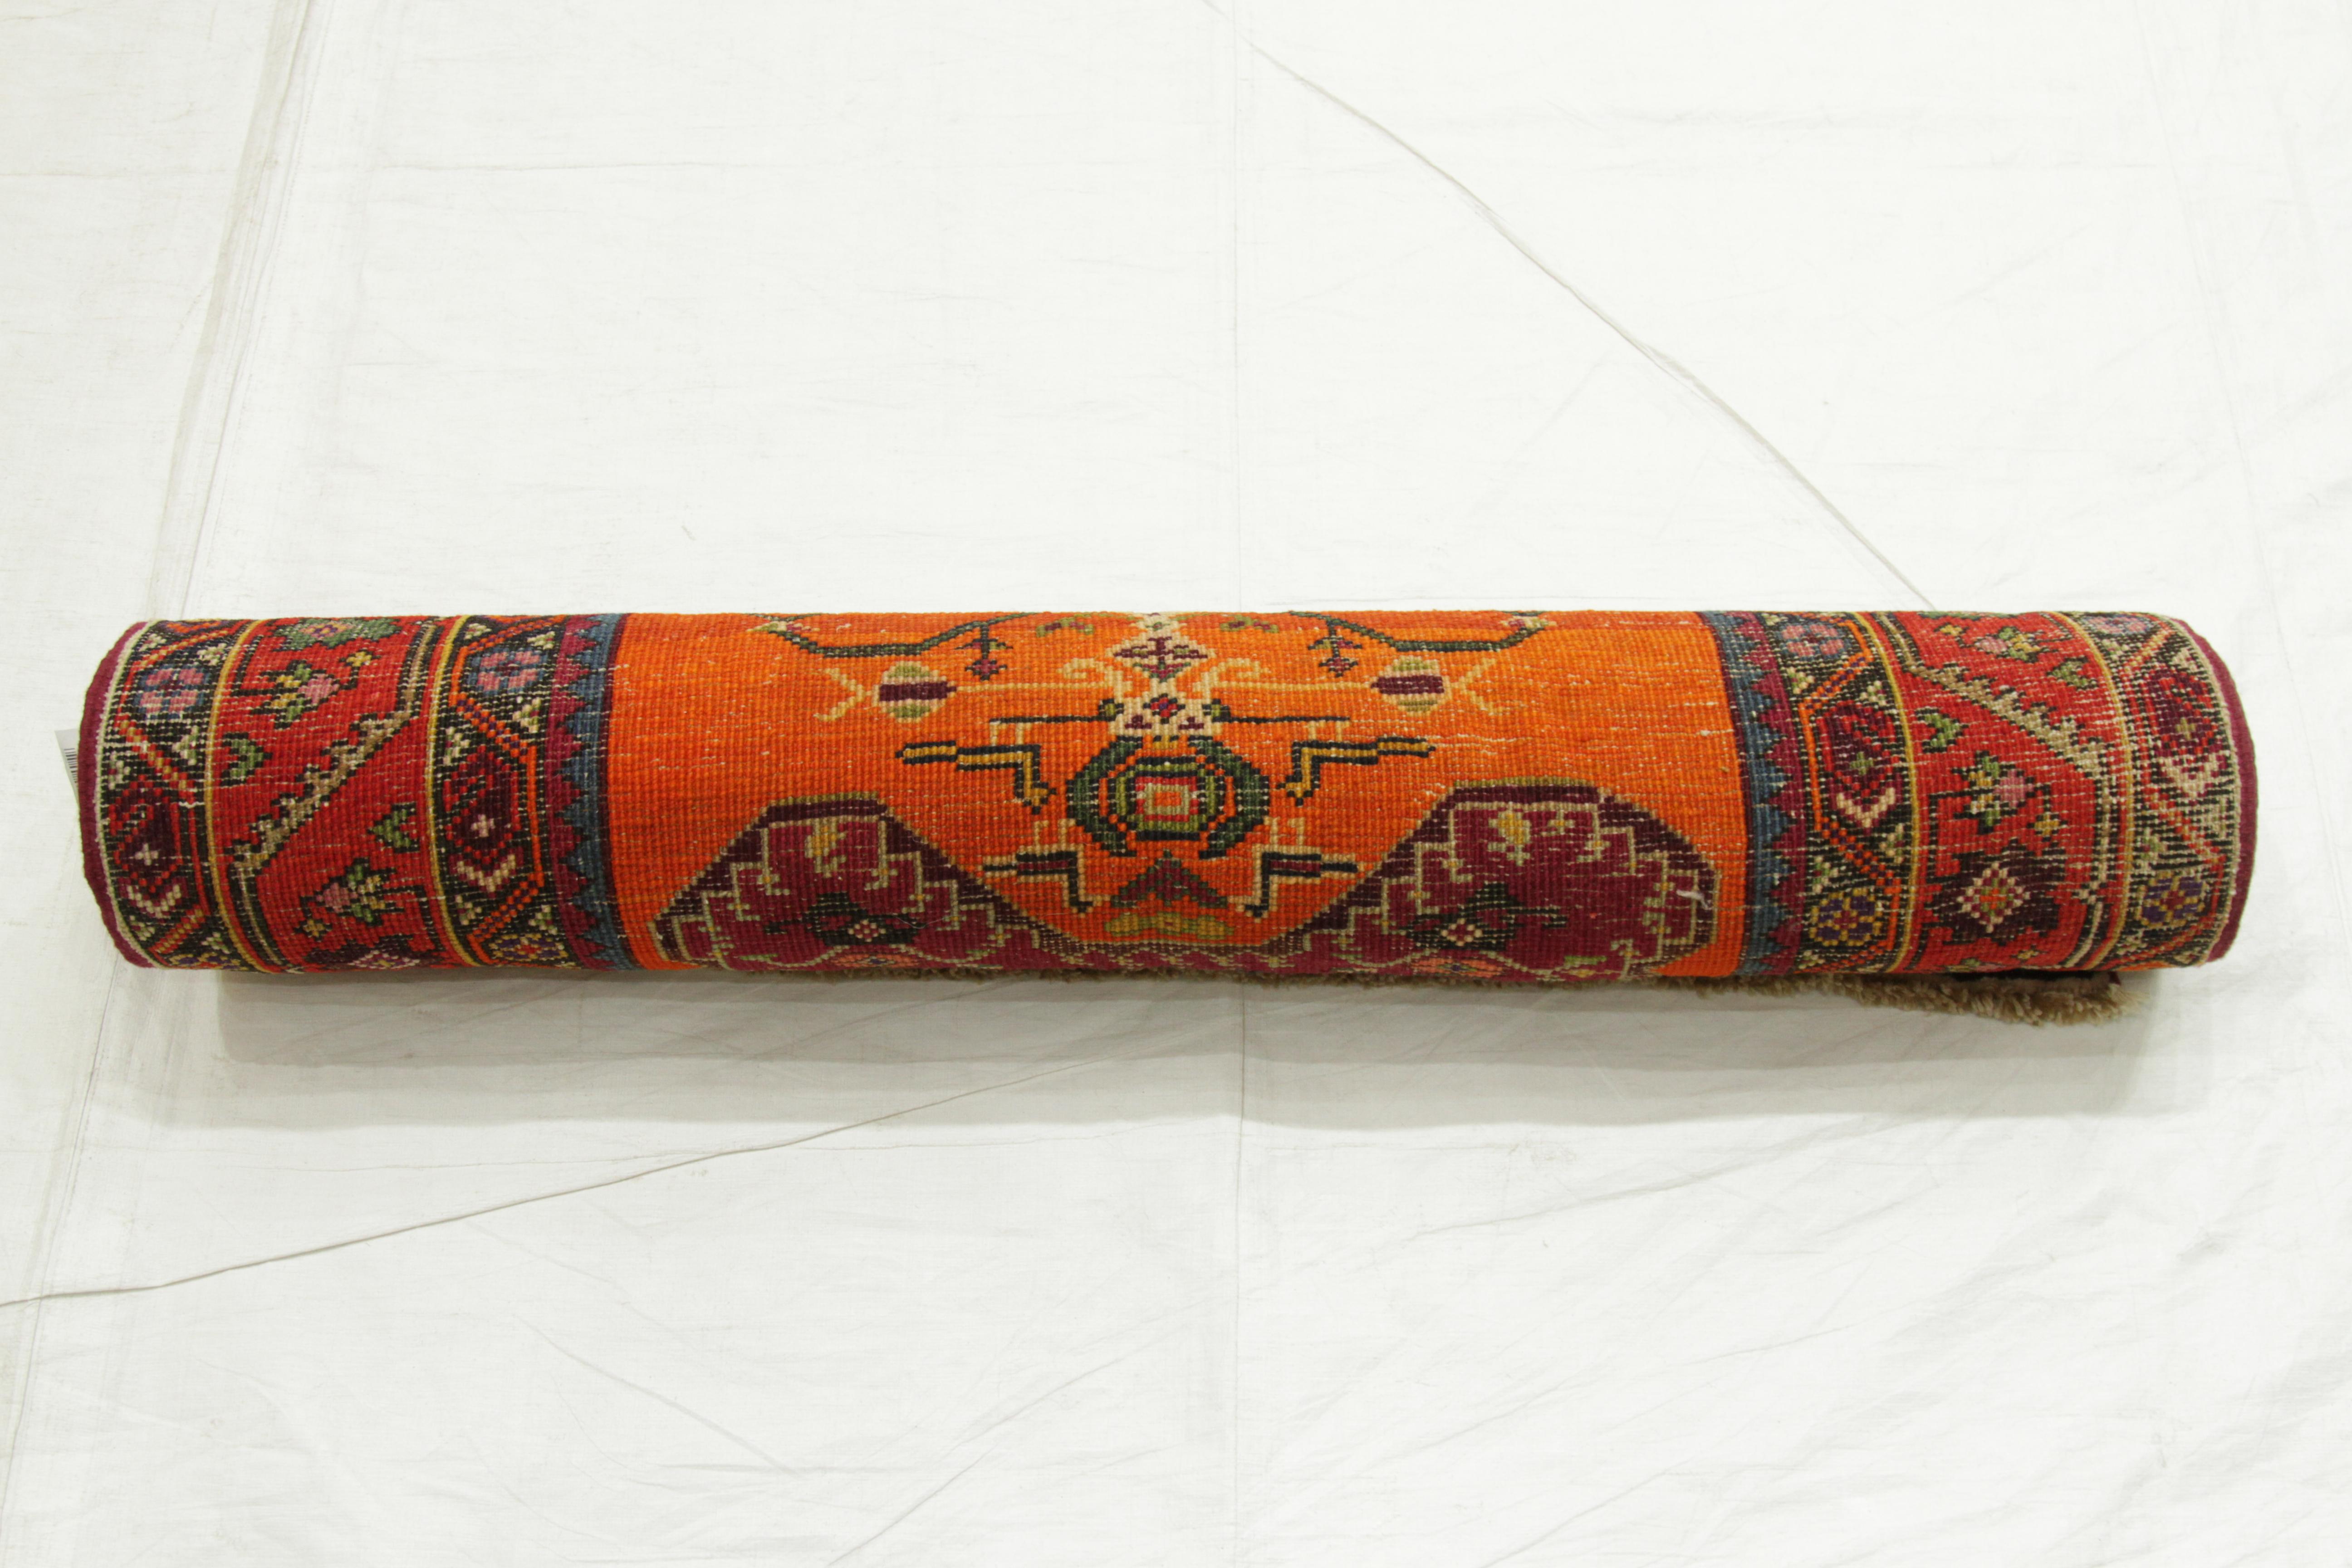 Twin Antique Persian Rug Karabagh Design with Gemstone Patterns, circa 1950s For Sale 5